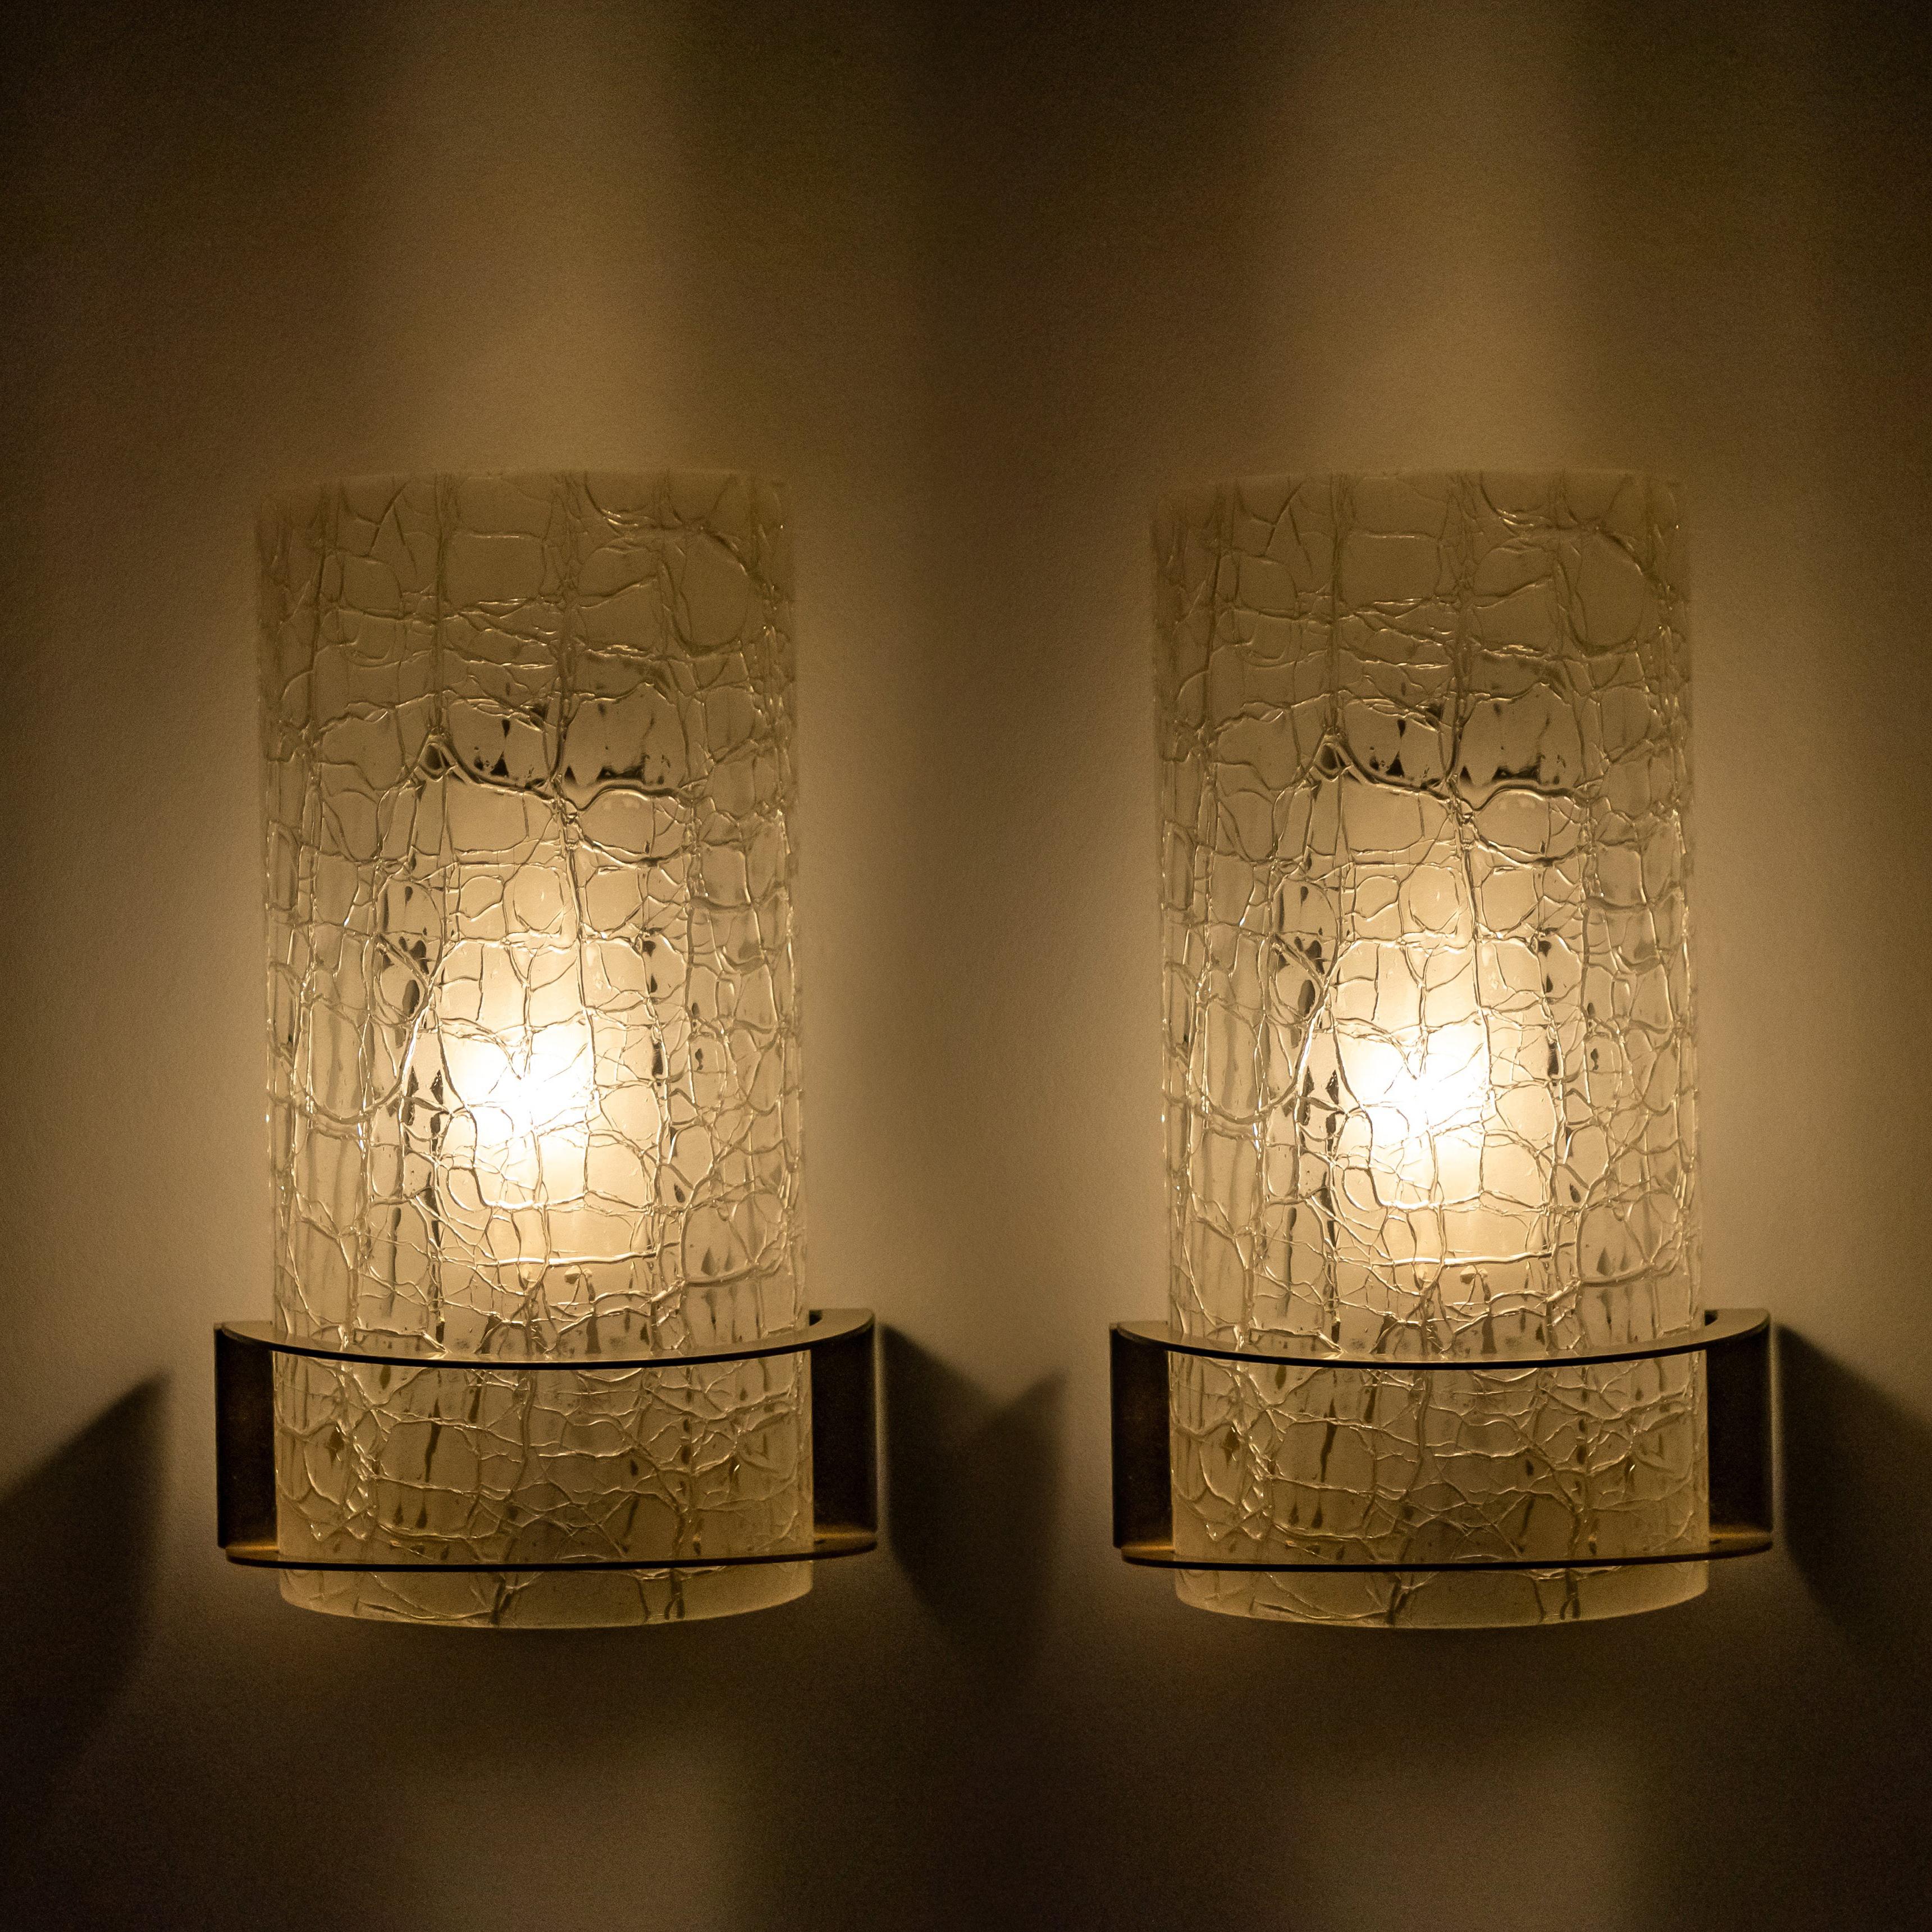 European Pair of Hillebrand Massive Crackle Glass Wall Light Fixtures, 1960 For Sale